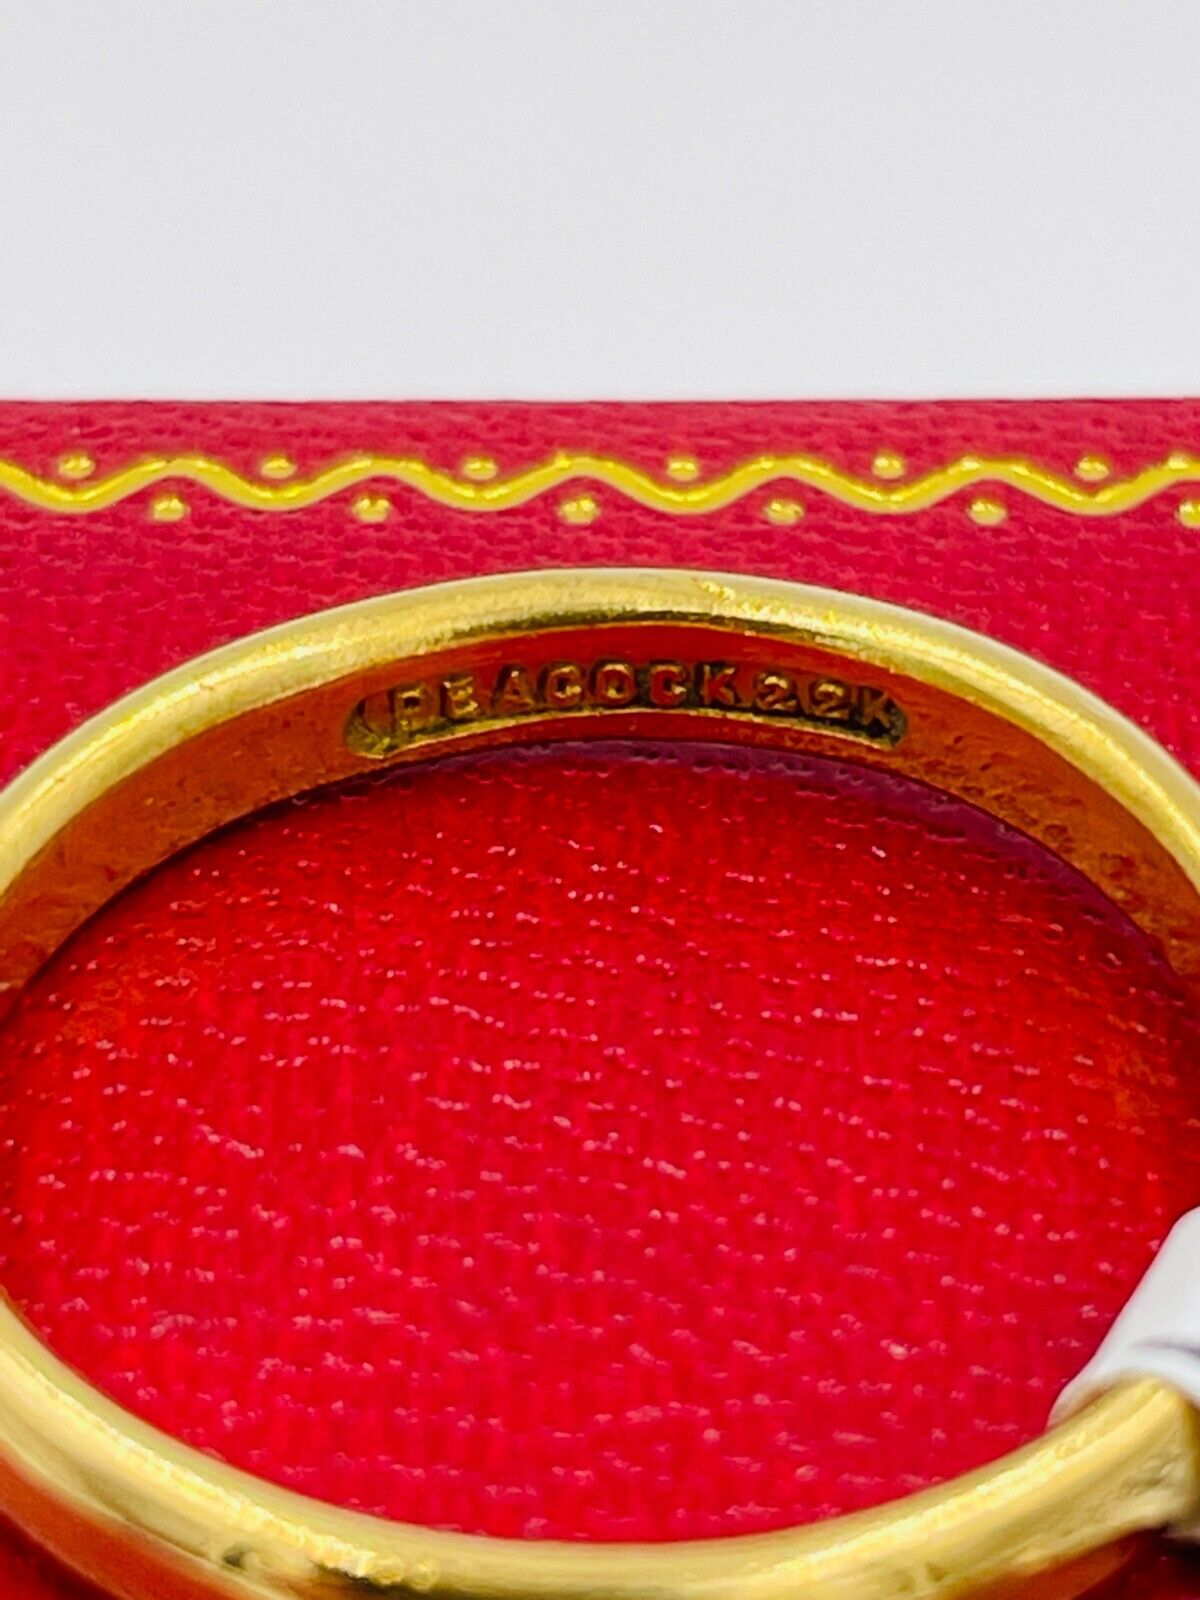 Estate 22k gold 3.33mm wide band ring size 10+ singed Peacock